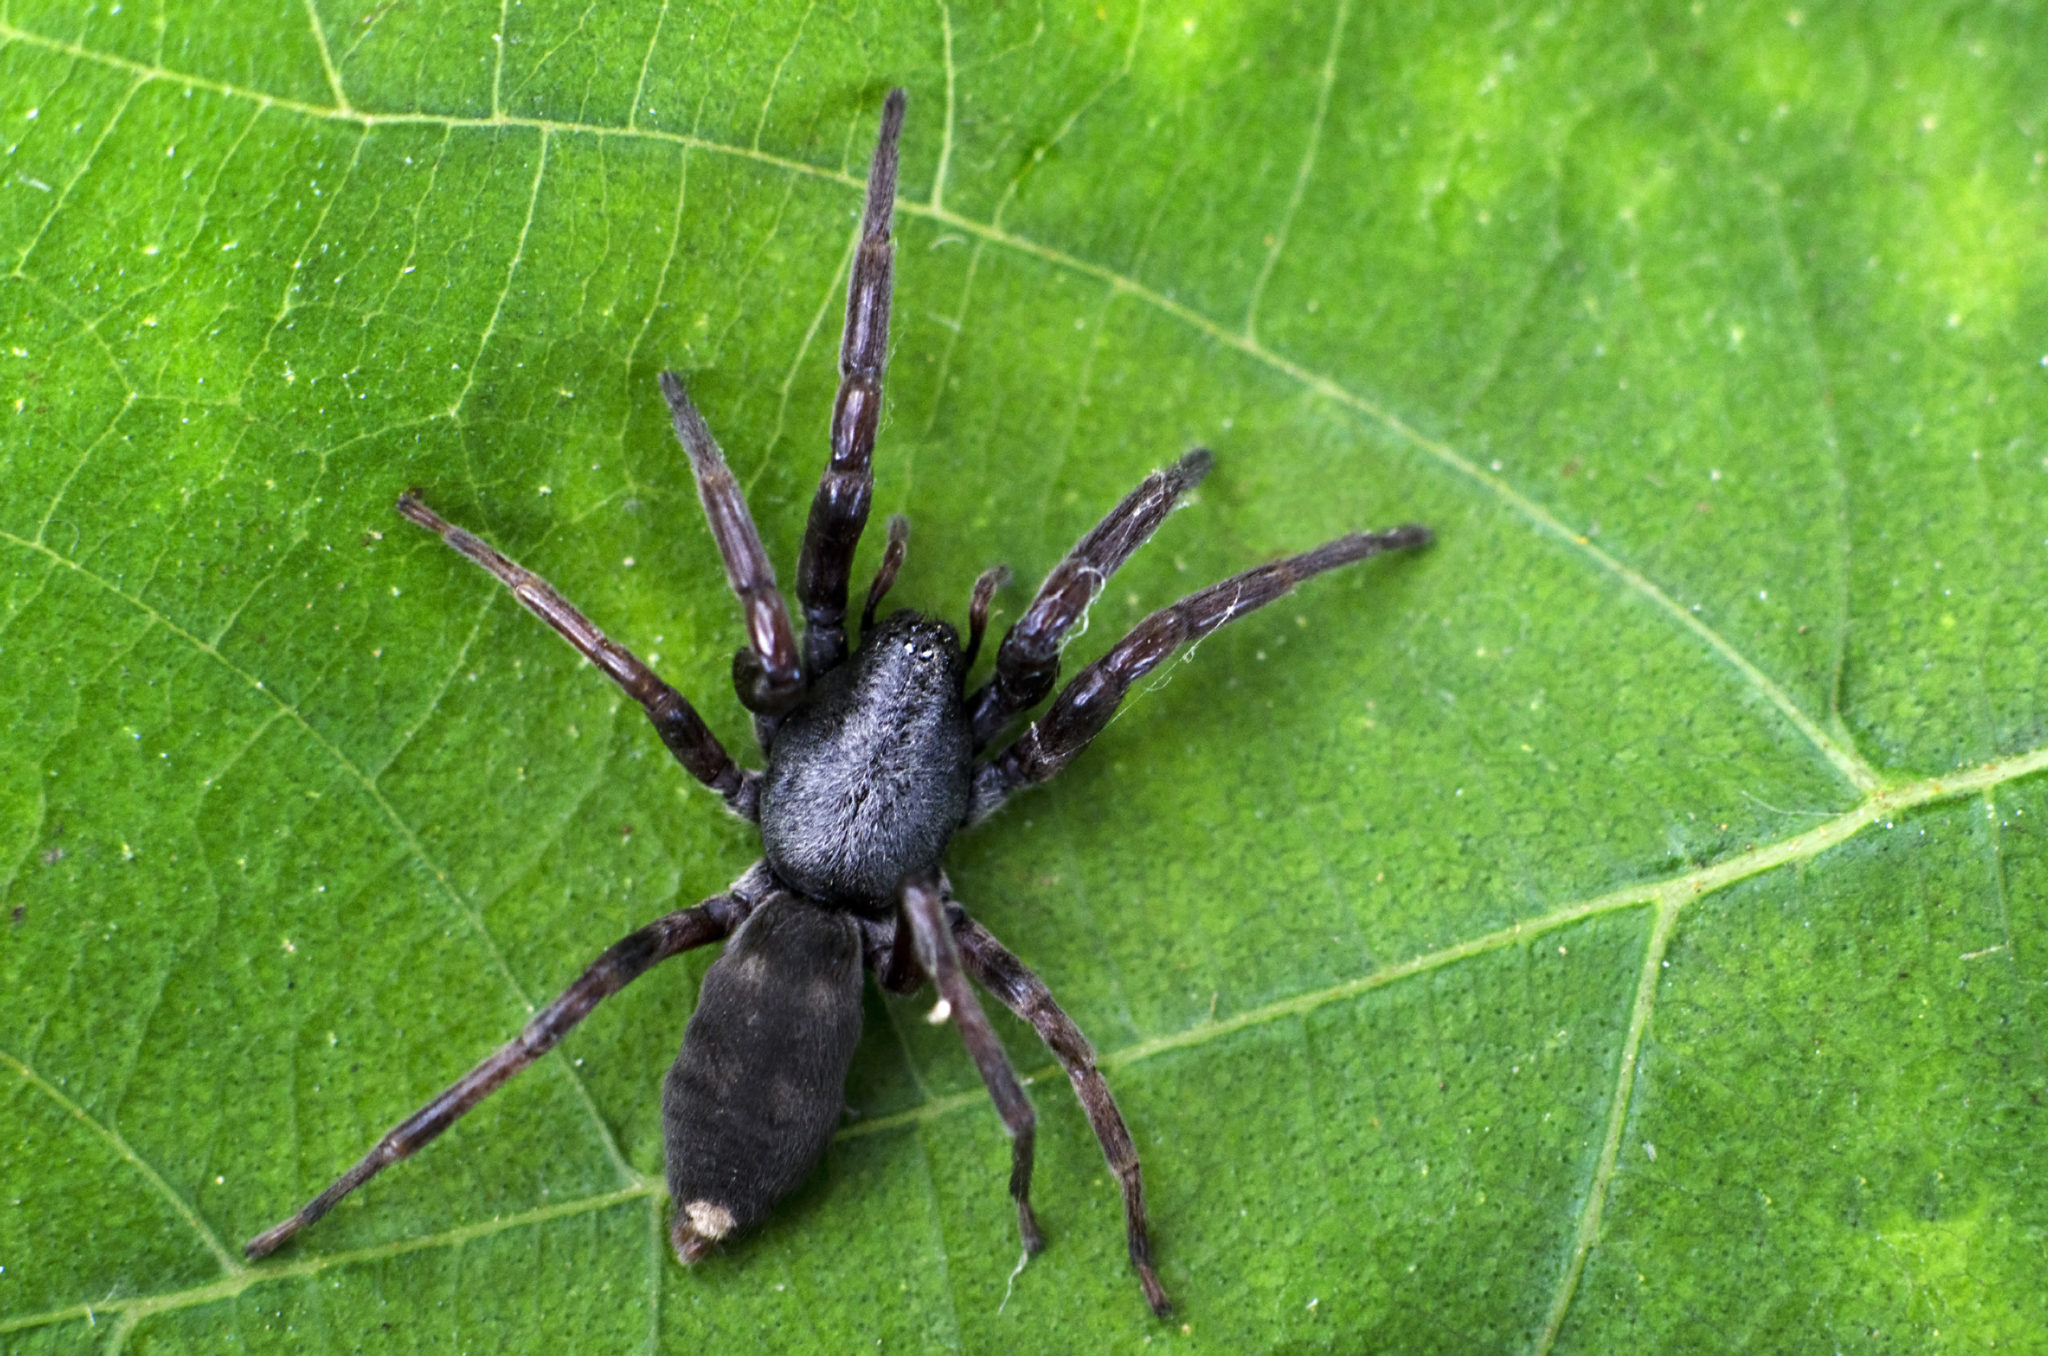 Professional Spider pest control in Central Coast